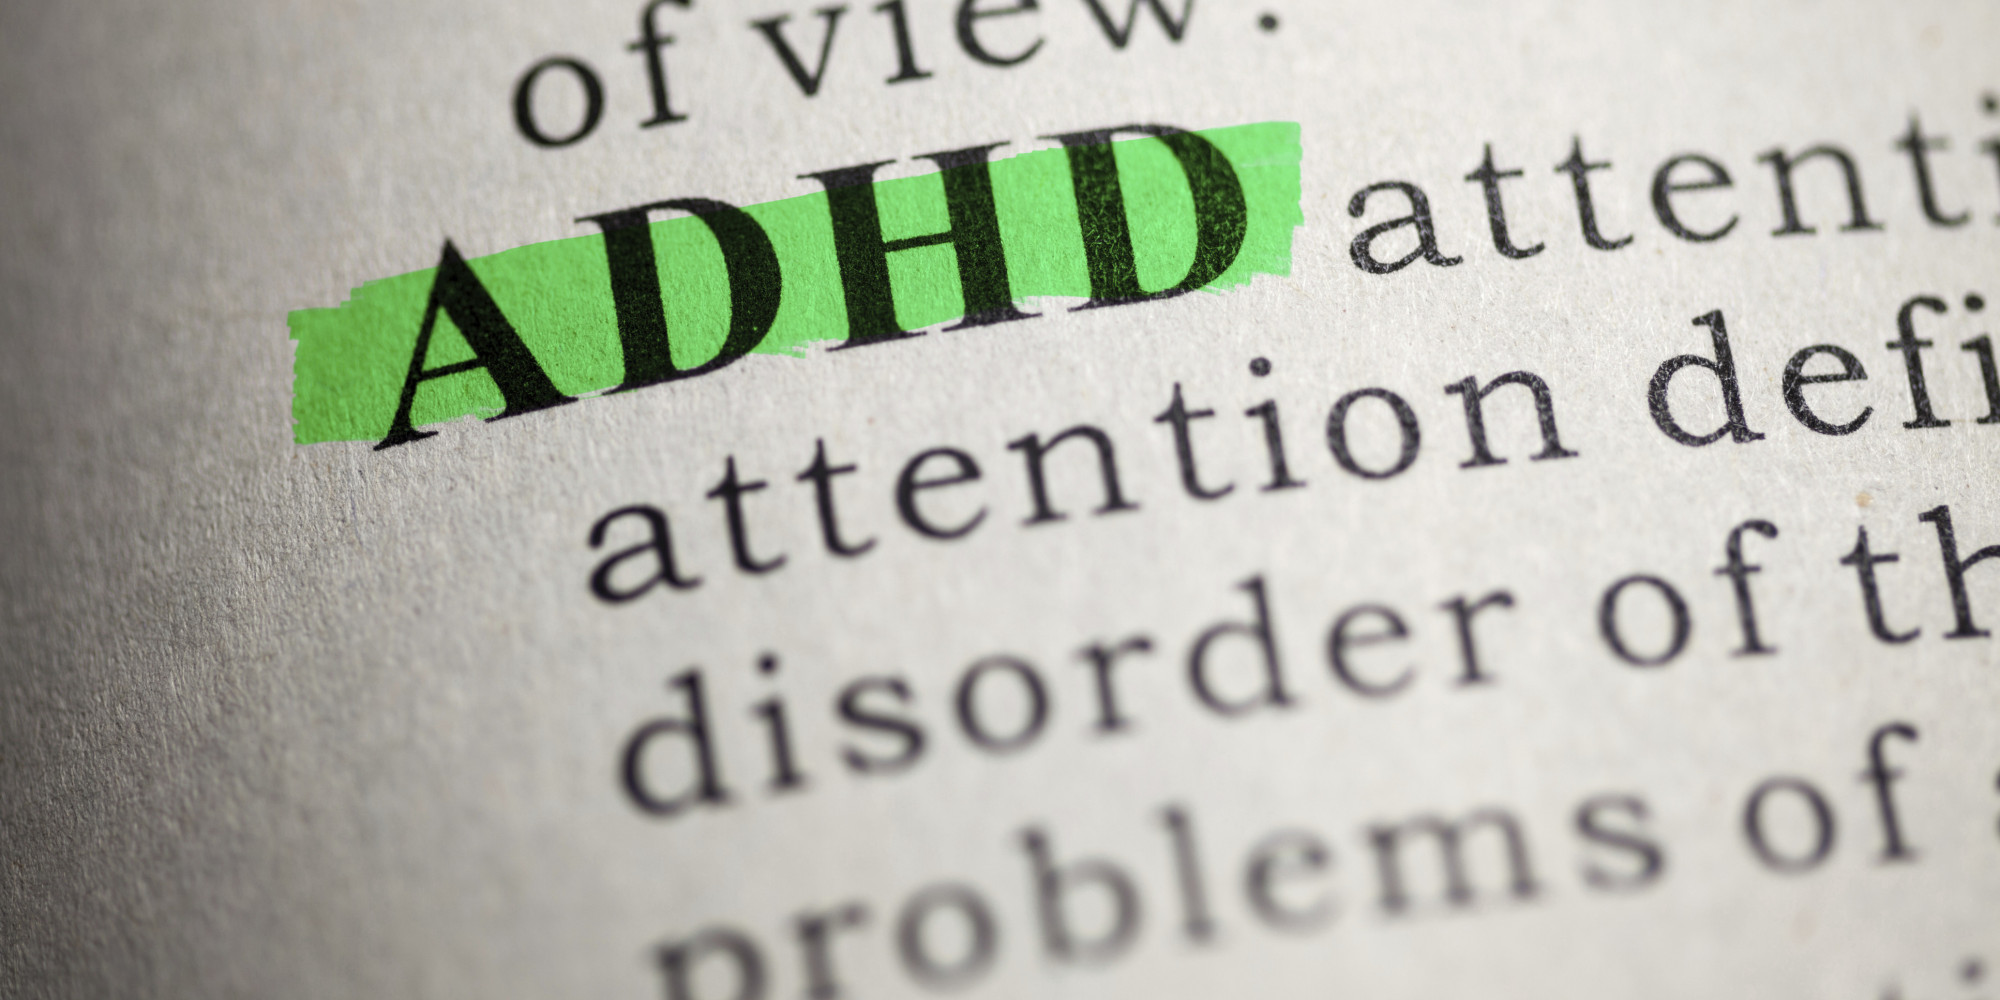 Adhd Is A Real Disability Not Just Childhood Immaturity